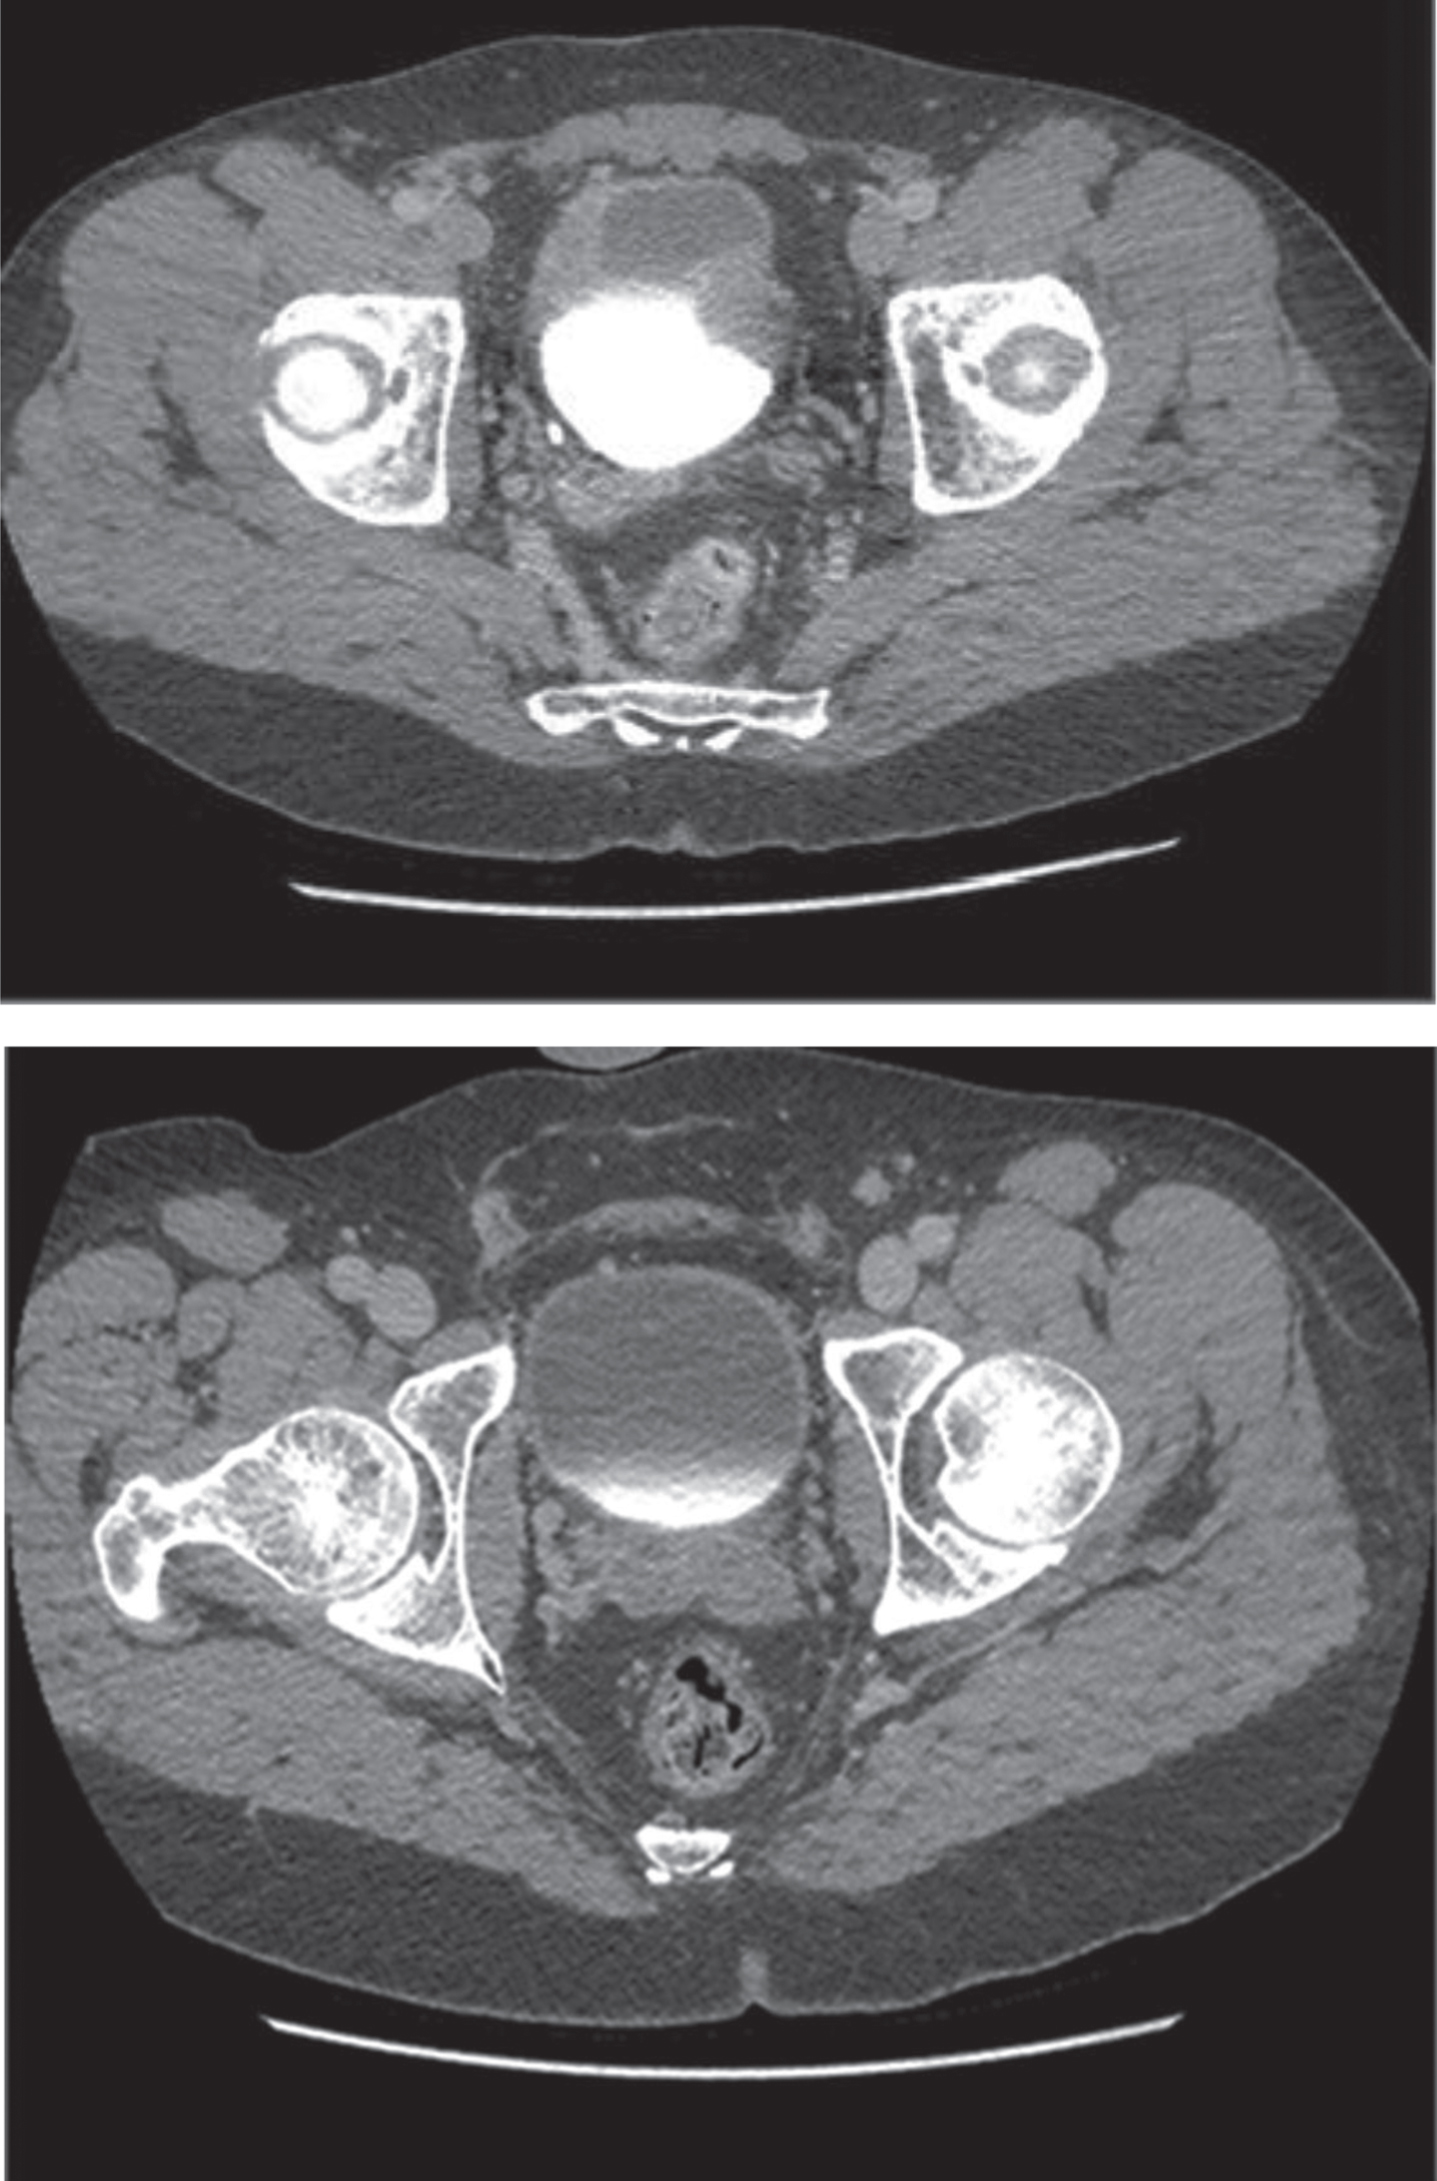 CT scan of MMC cystitis: pre-algorithm treatment image demonstrates bladder wall thickening suggestive of bladder cancer recurrence; however, this was biopsy proven MMC cystitis. The post-treatment image on the bottom was following steroids and antihistamine treatment per algorithm.